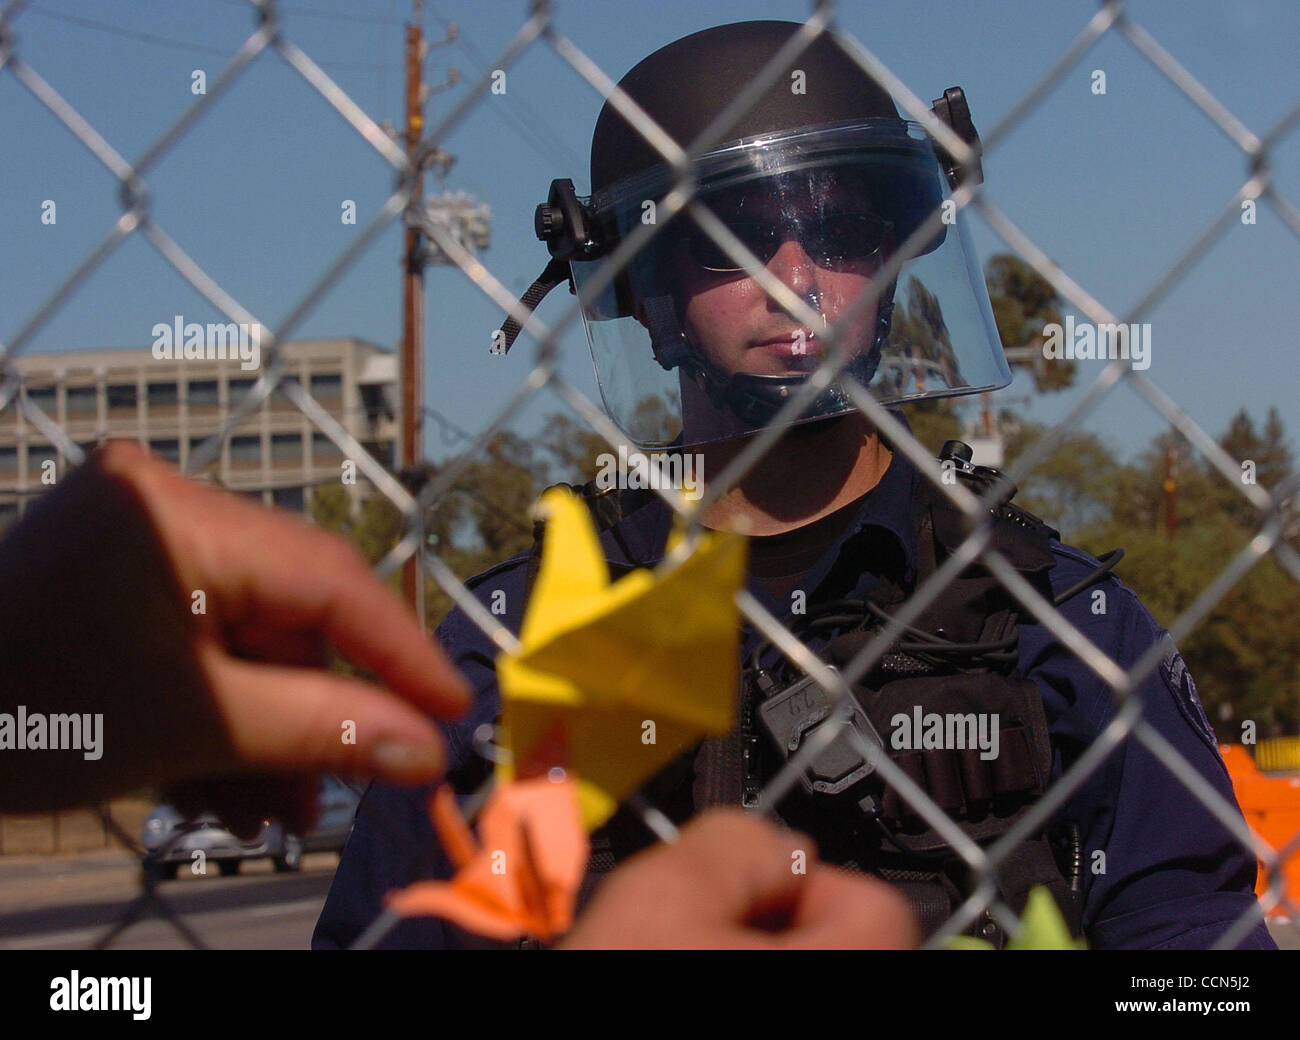 A protestor places a peace crane on a chain link fence at the entrance of the Lawrence Livermore National Labratory as police guard the gate on Sunday, August 8, 2004 in Livermore, Calif. The march was held in commemoration of the 59th anniversary of the Hiroshima and Nagasaki atomic bombings. (Jose Stock Photo